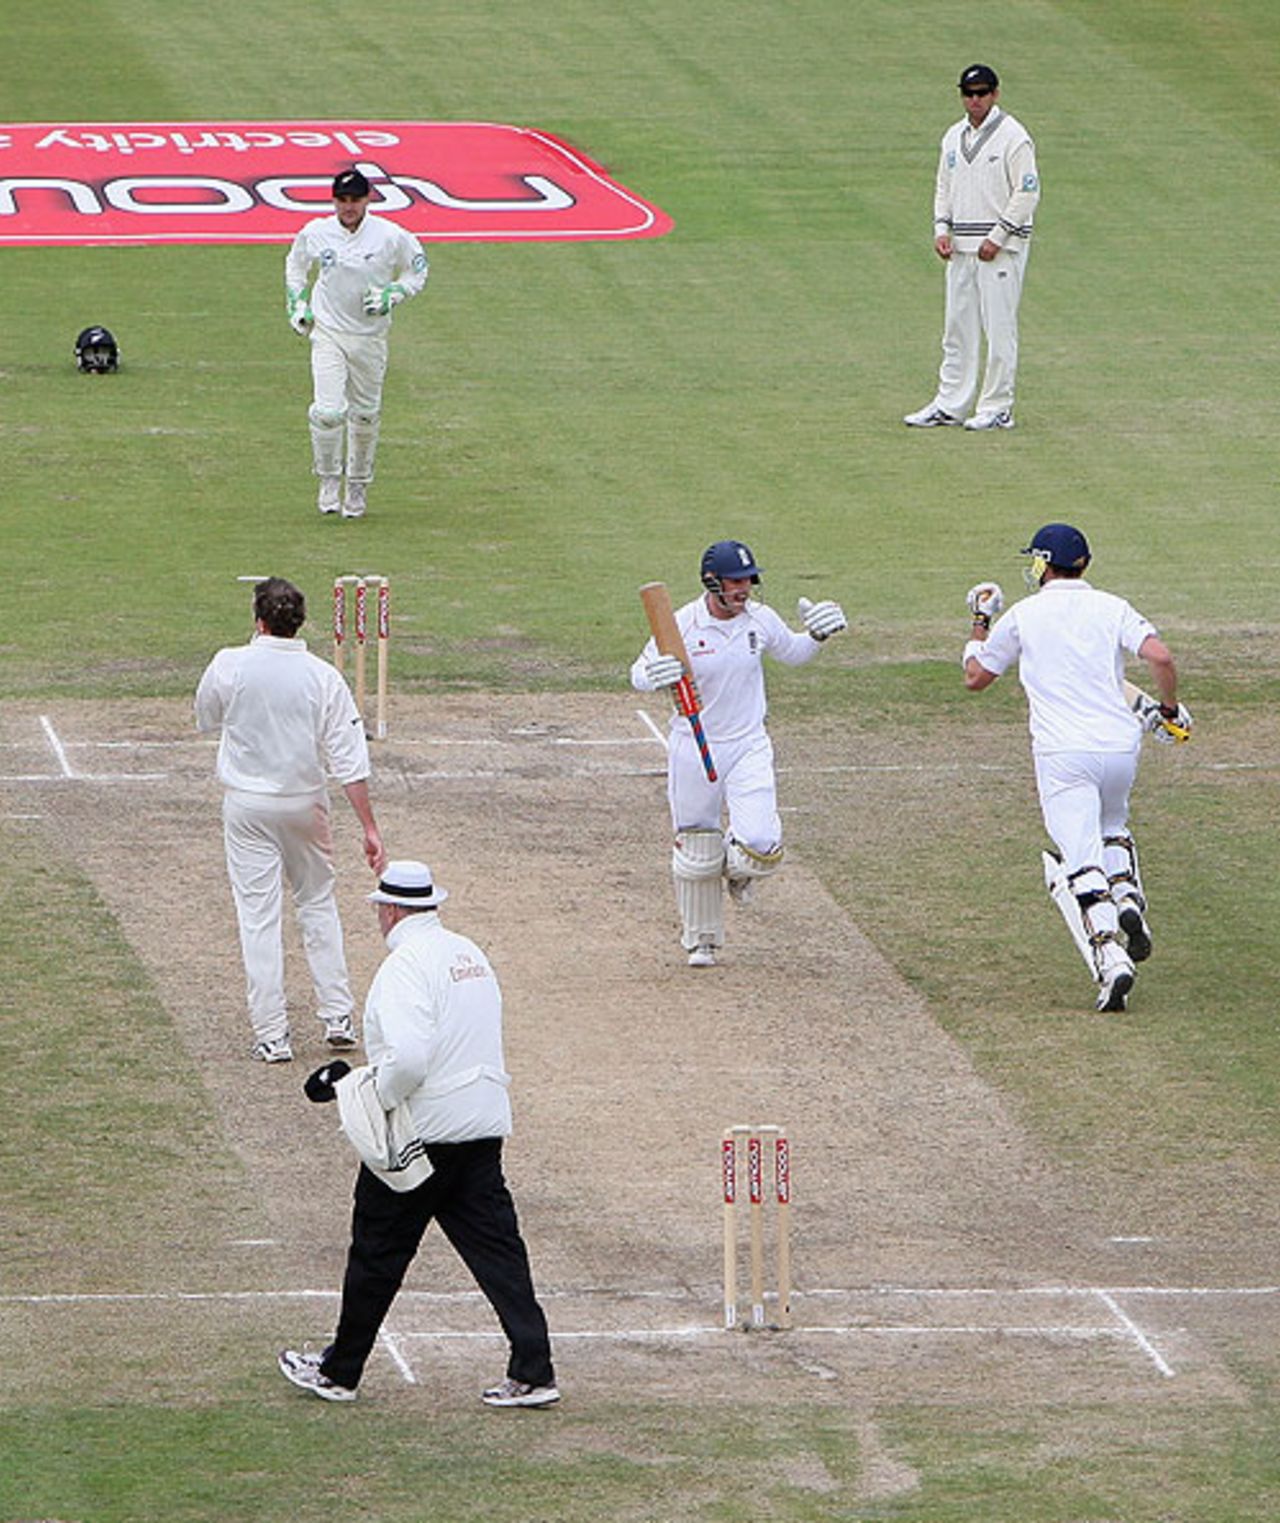 Andrew Strauss reaches his hundred, as Kevin Pietersen joins the celebration, England v New Zealand, 2nd Test, Old Trafford, May 25, 2008